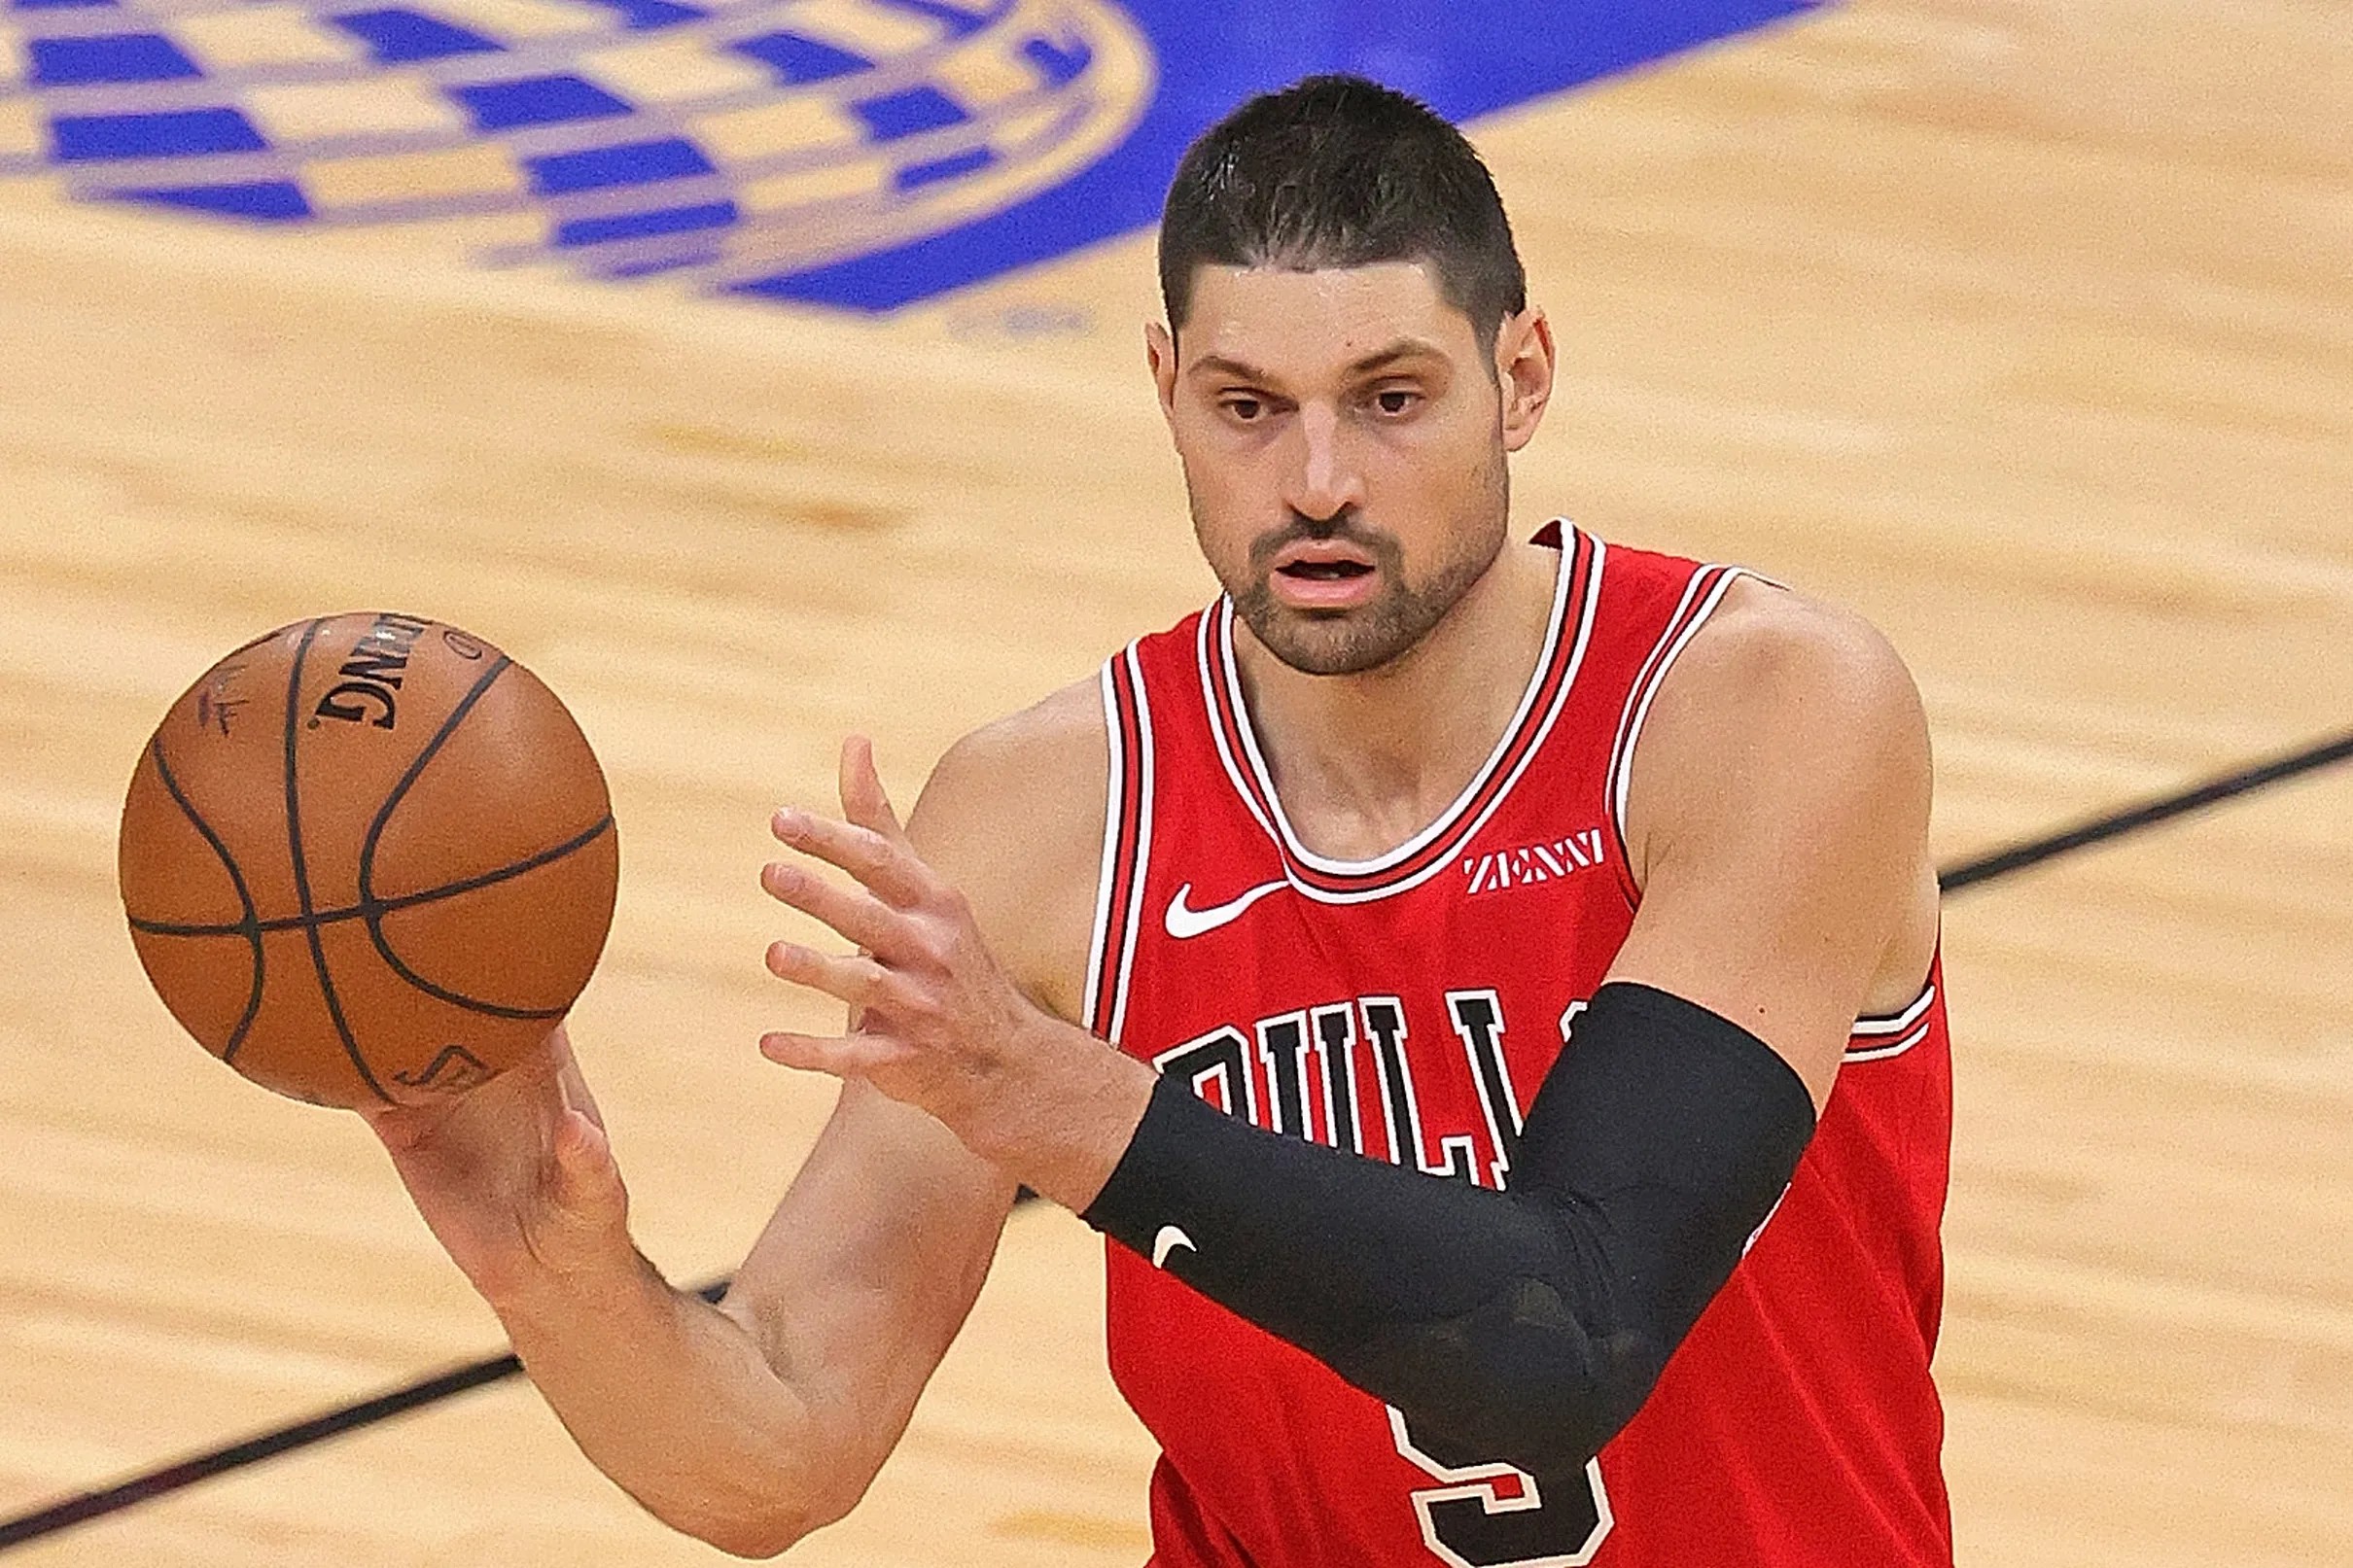 Bulls vs. Pacers game preview and thread the race for 9th